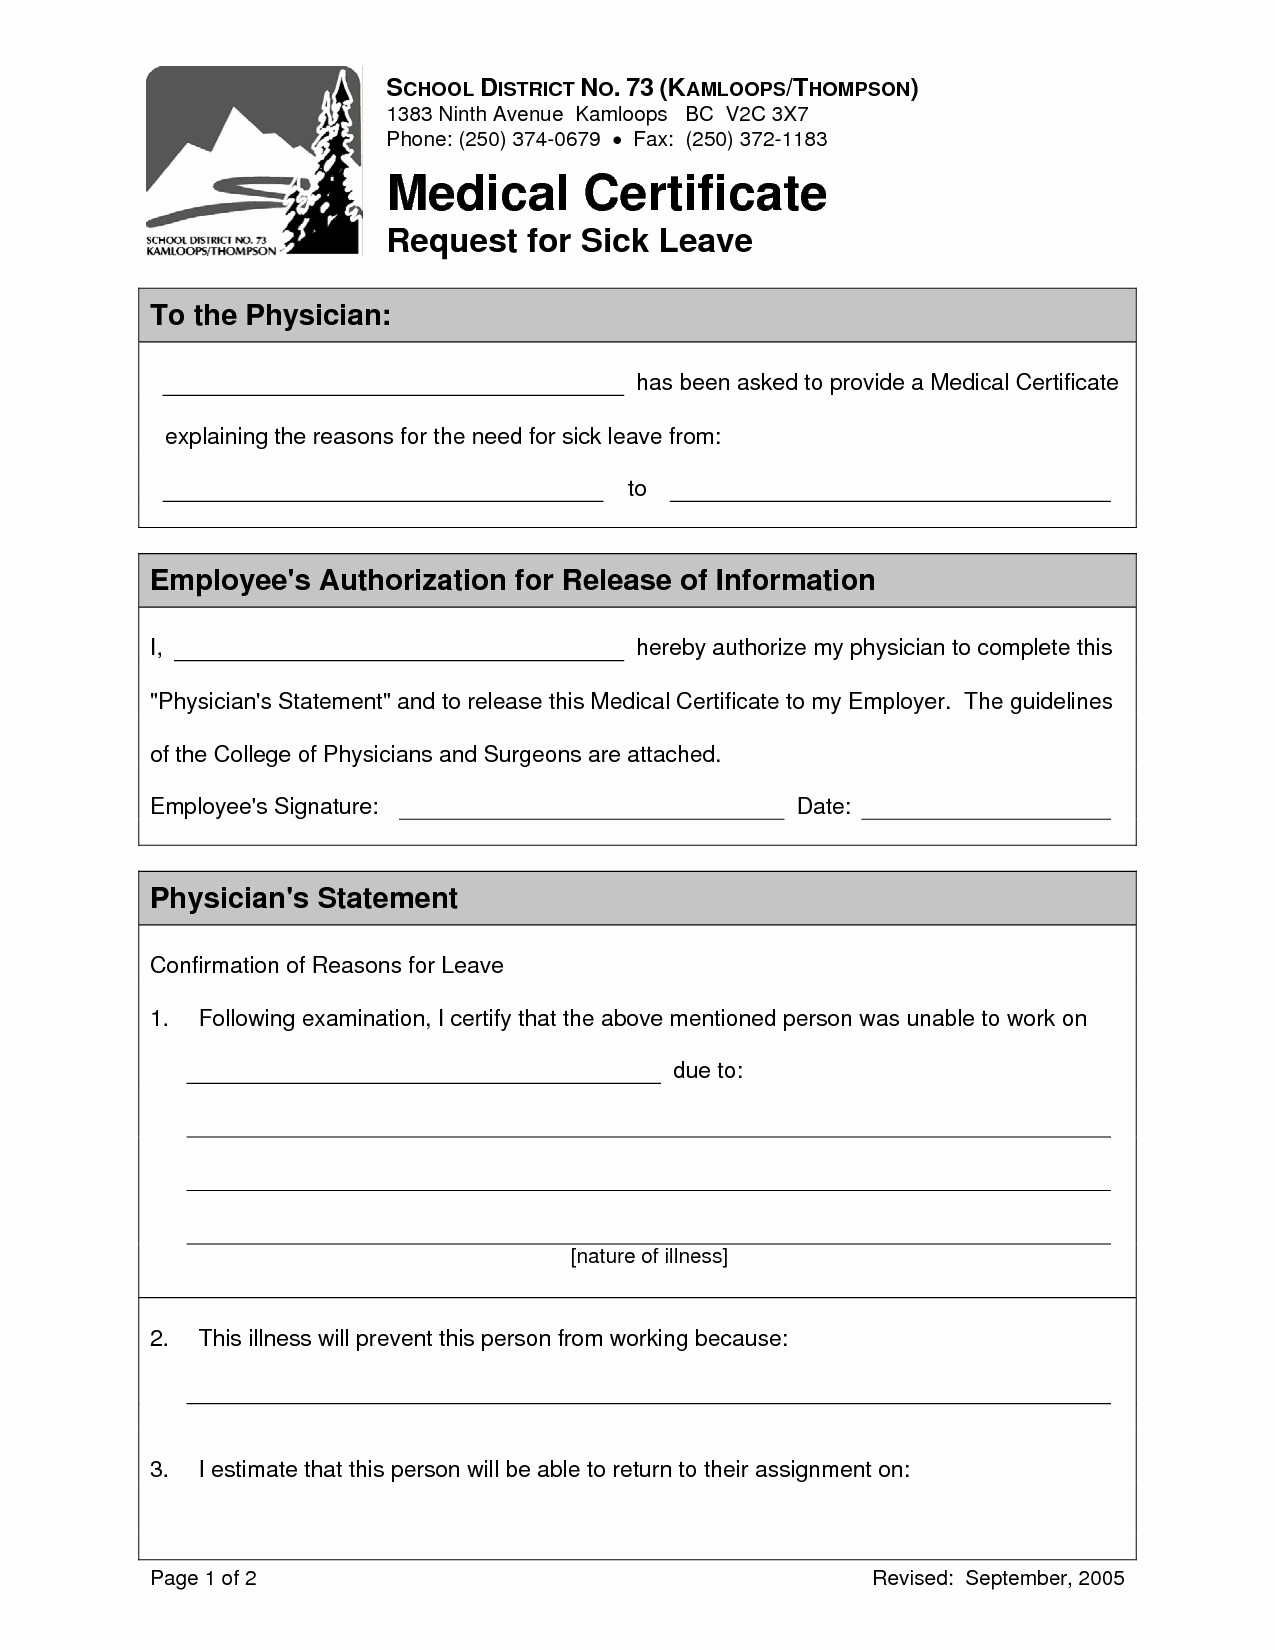 Doctor Certificate for Sick Leave Template Lovely 19 Medical Certificate Templates for Leave Pdf Docs